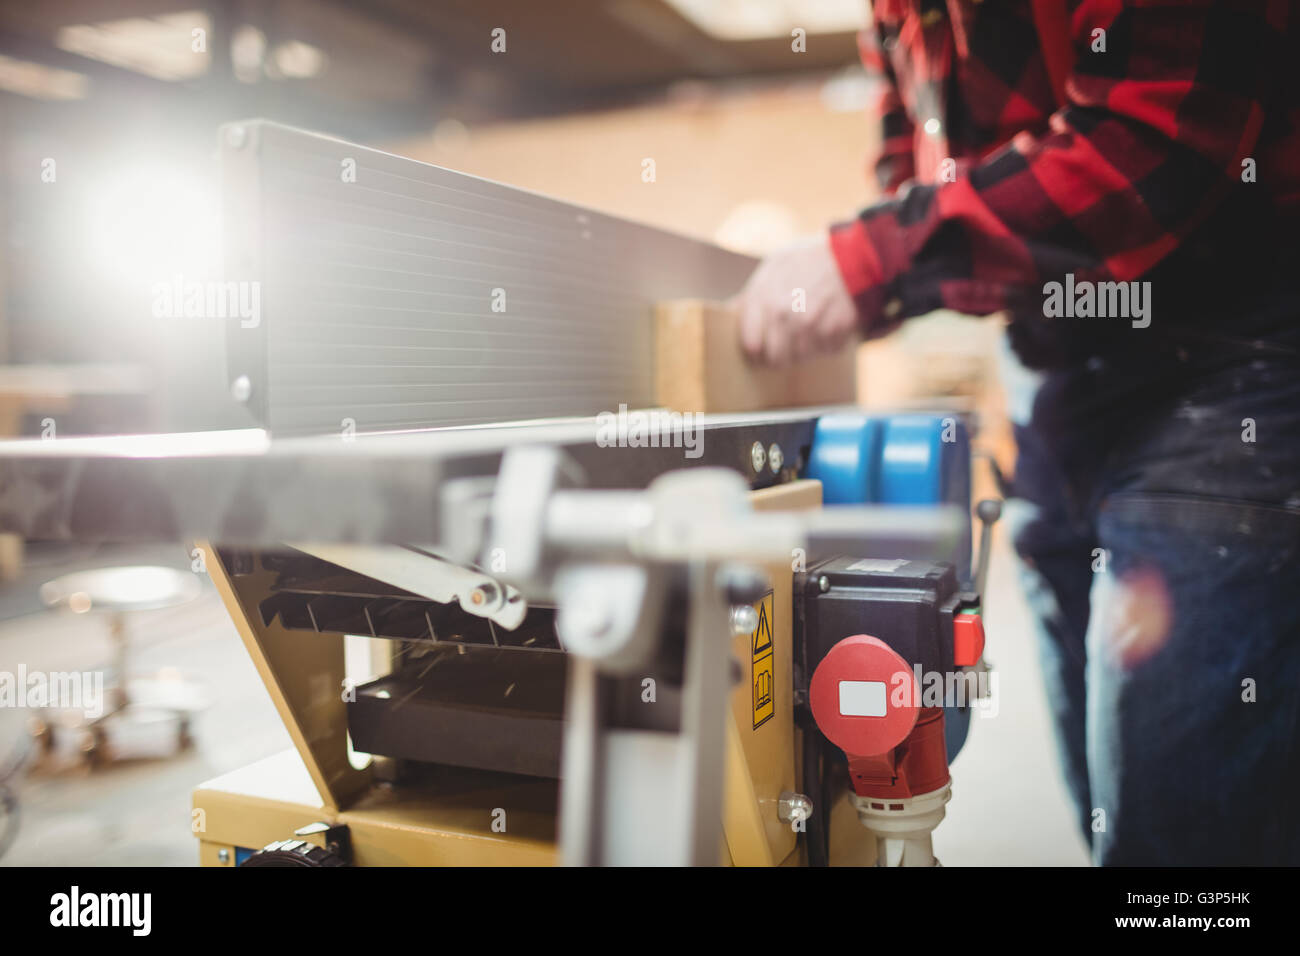 Carpenter sawing a plank of wood Stock Photo